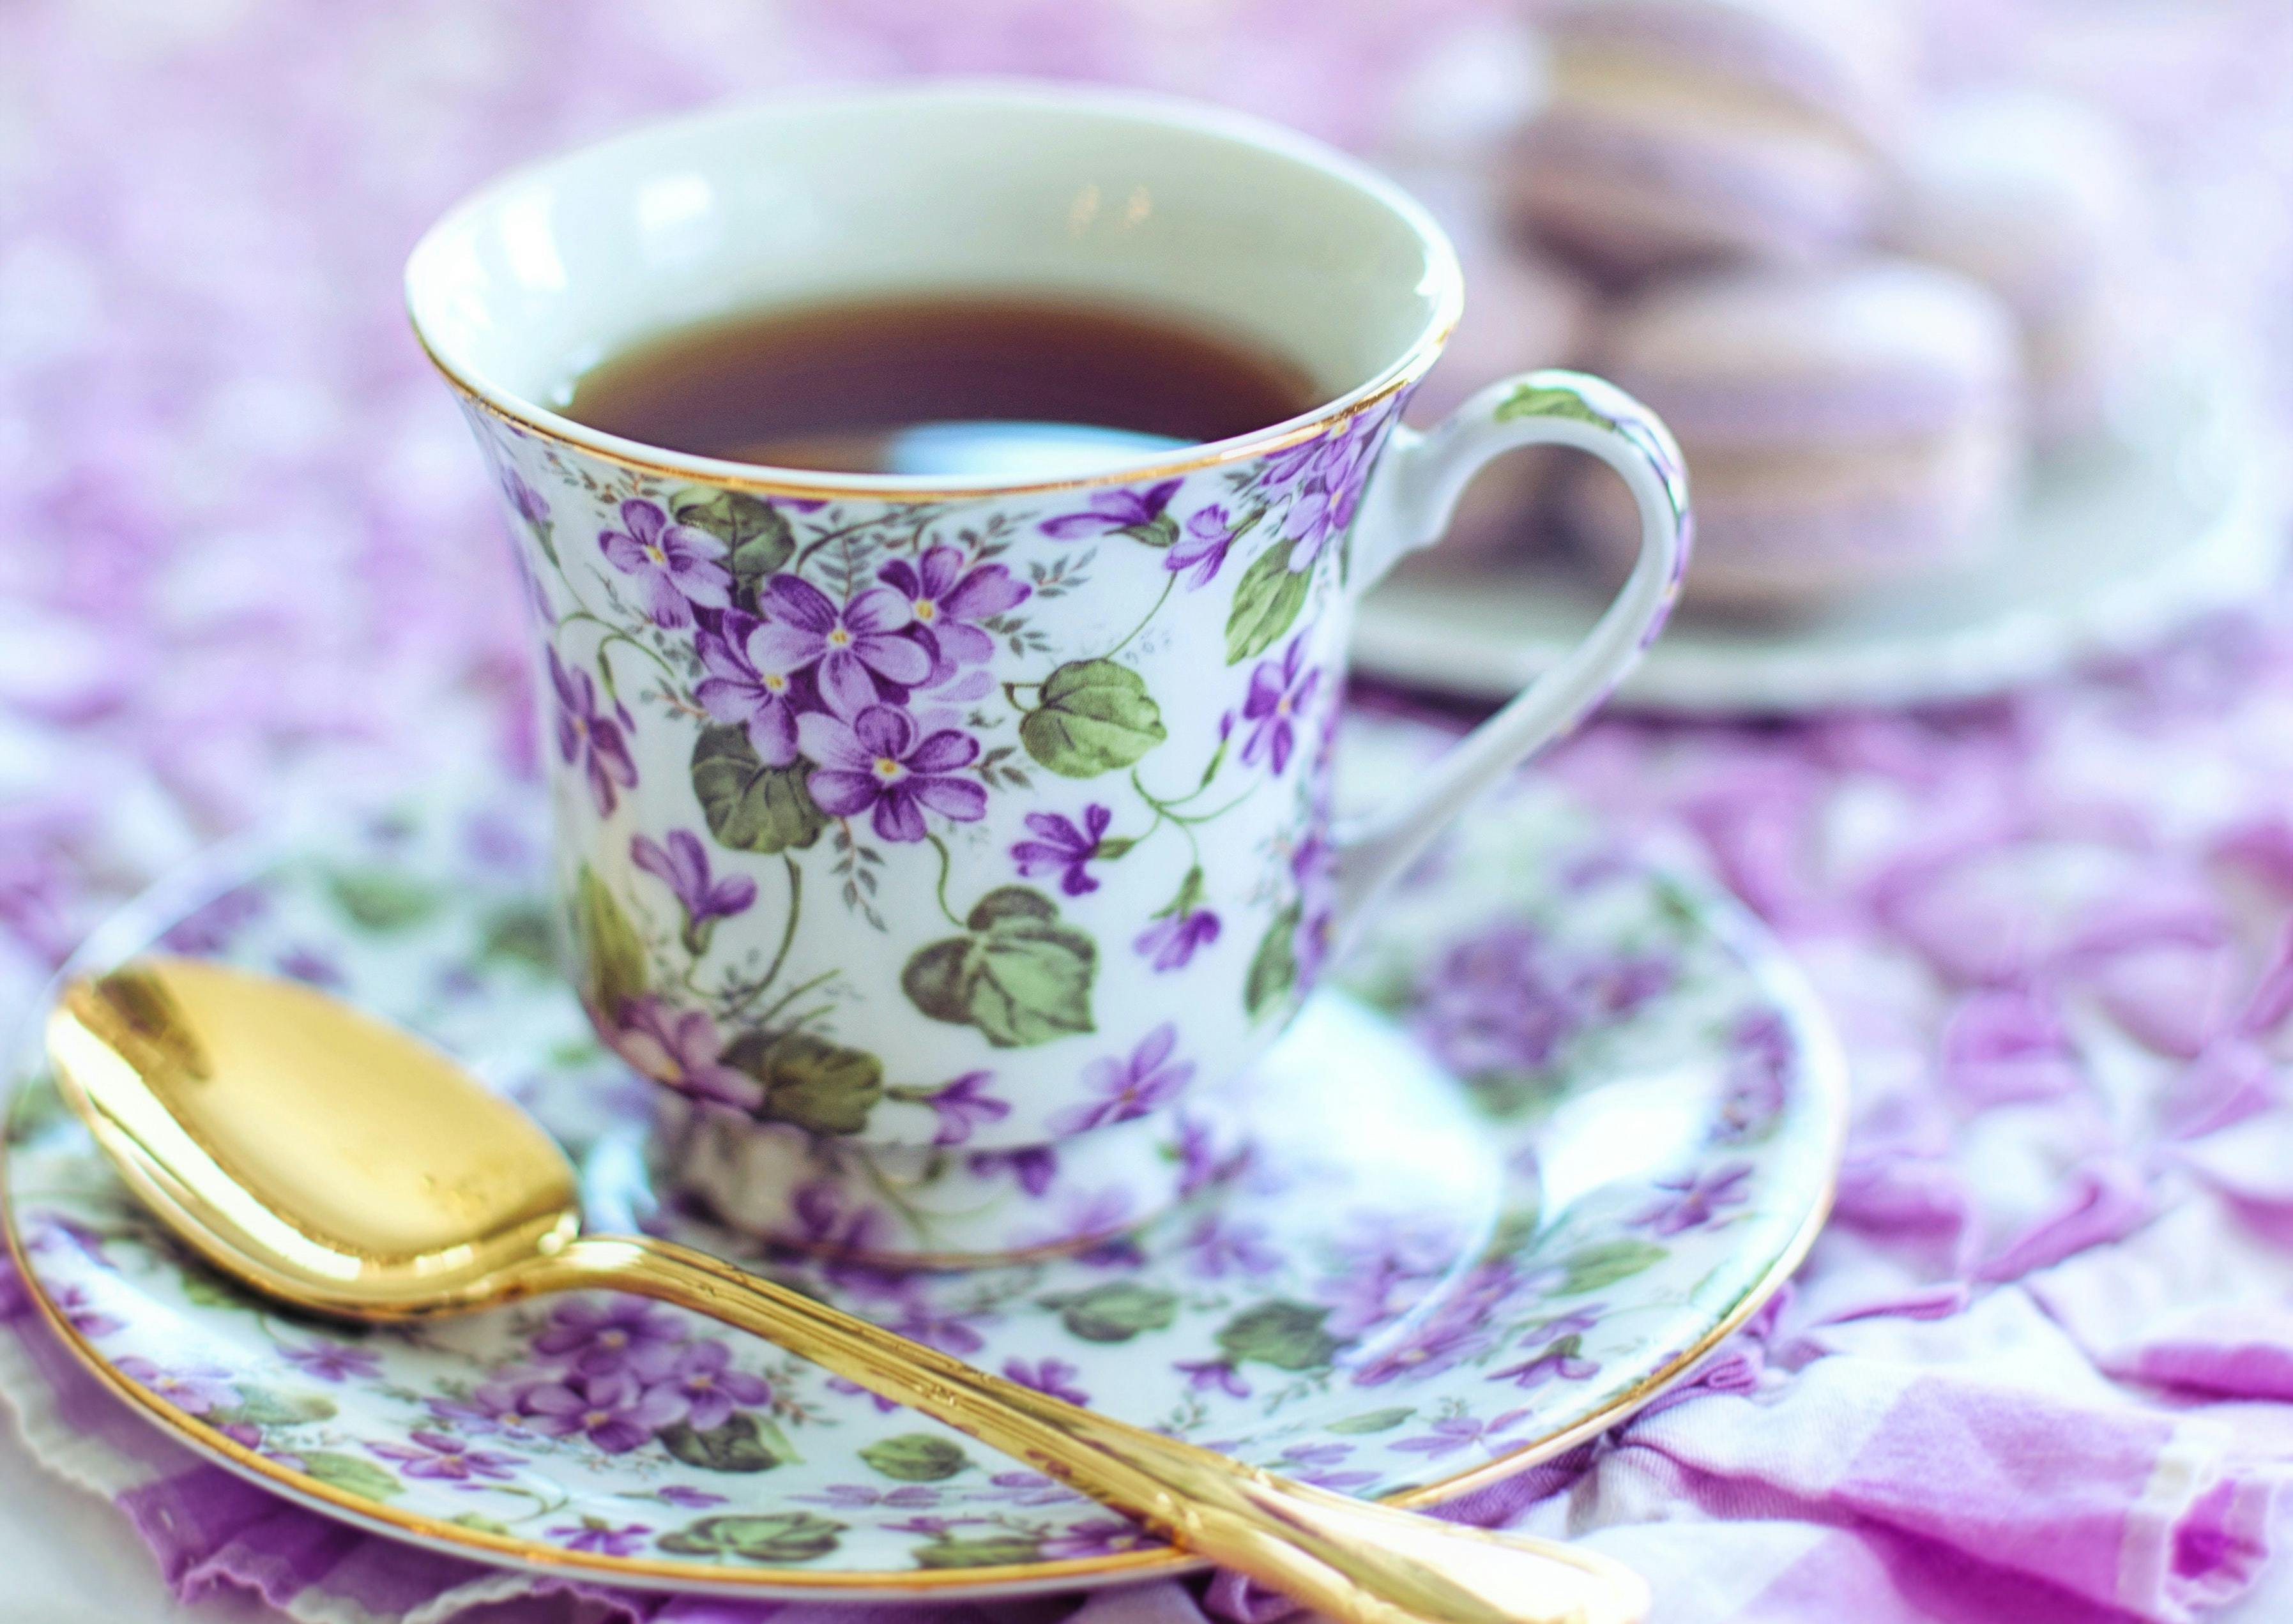 Photo by Jill Wellington: https://www.pexels.com/photo/white-and-purple-floral-ceramic-mug-on-saucer-3776948/